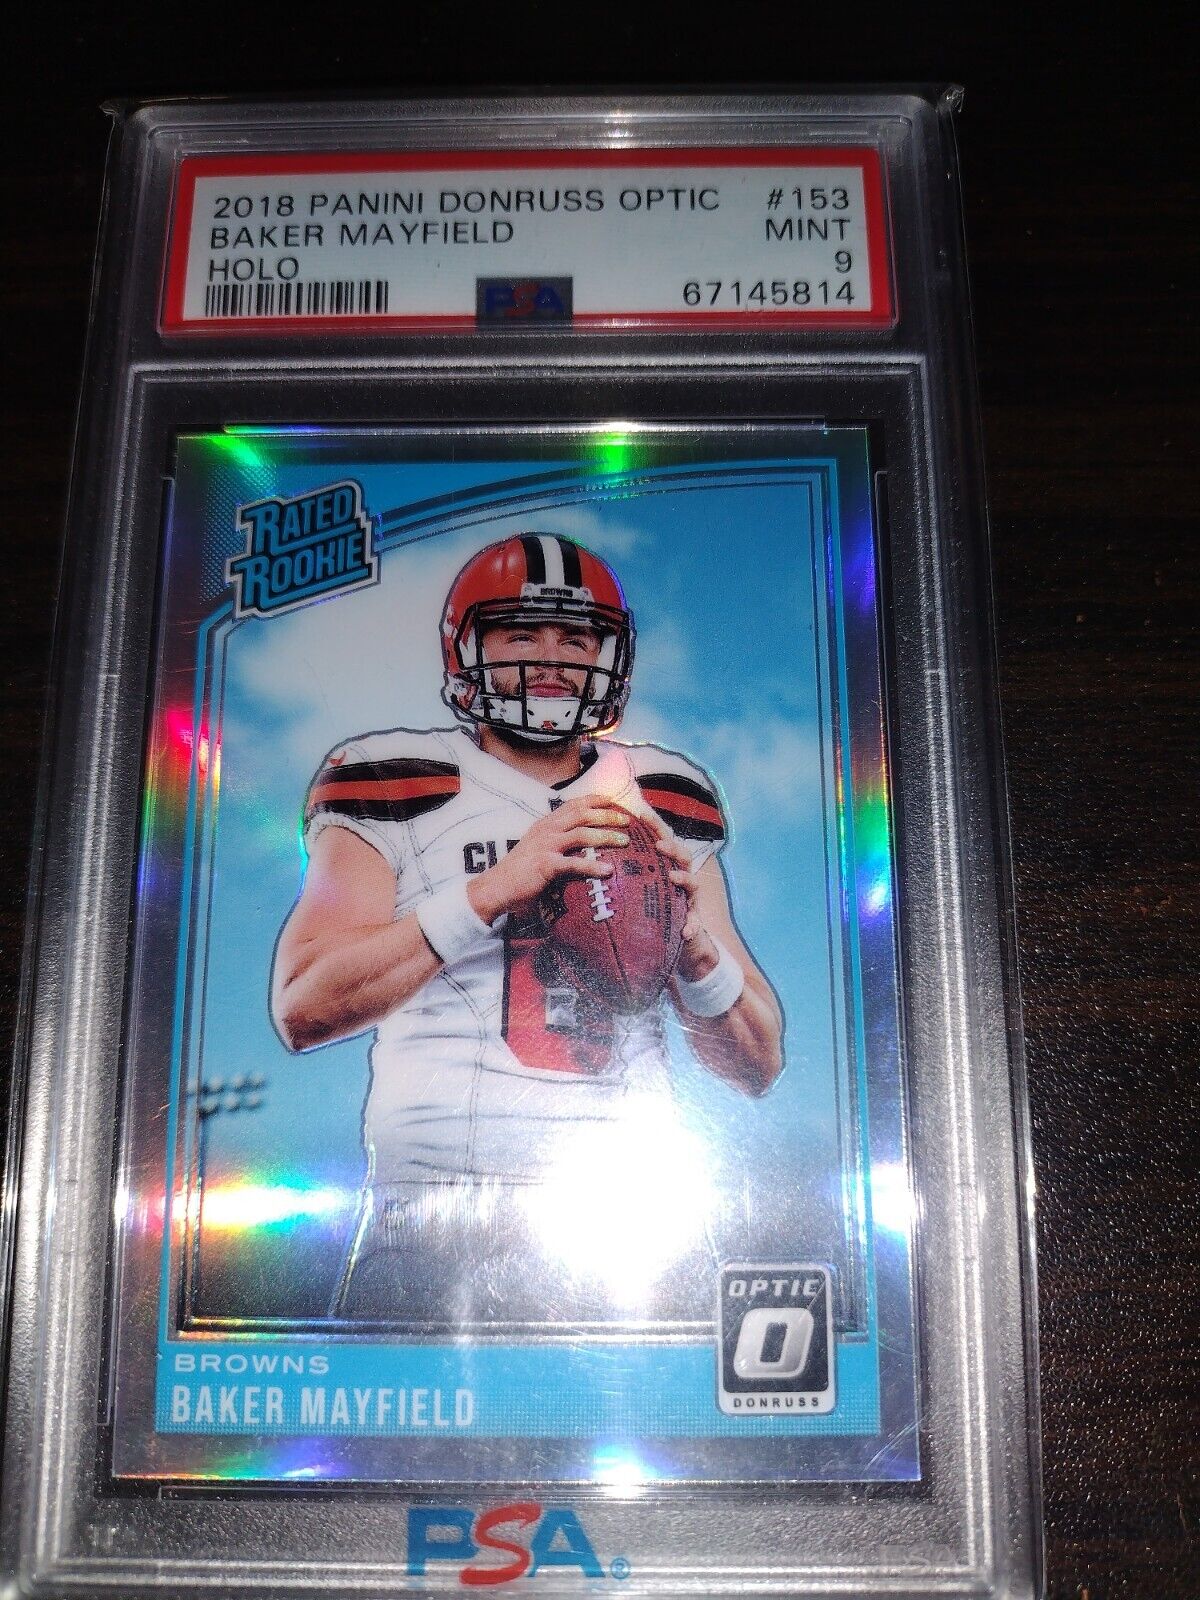 Baker Mayfield 2018 Optic Holo Rated Rookie PSA 9 # 153